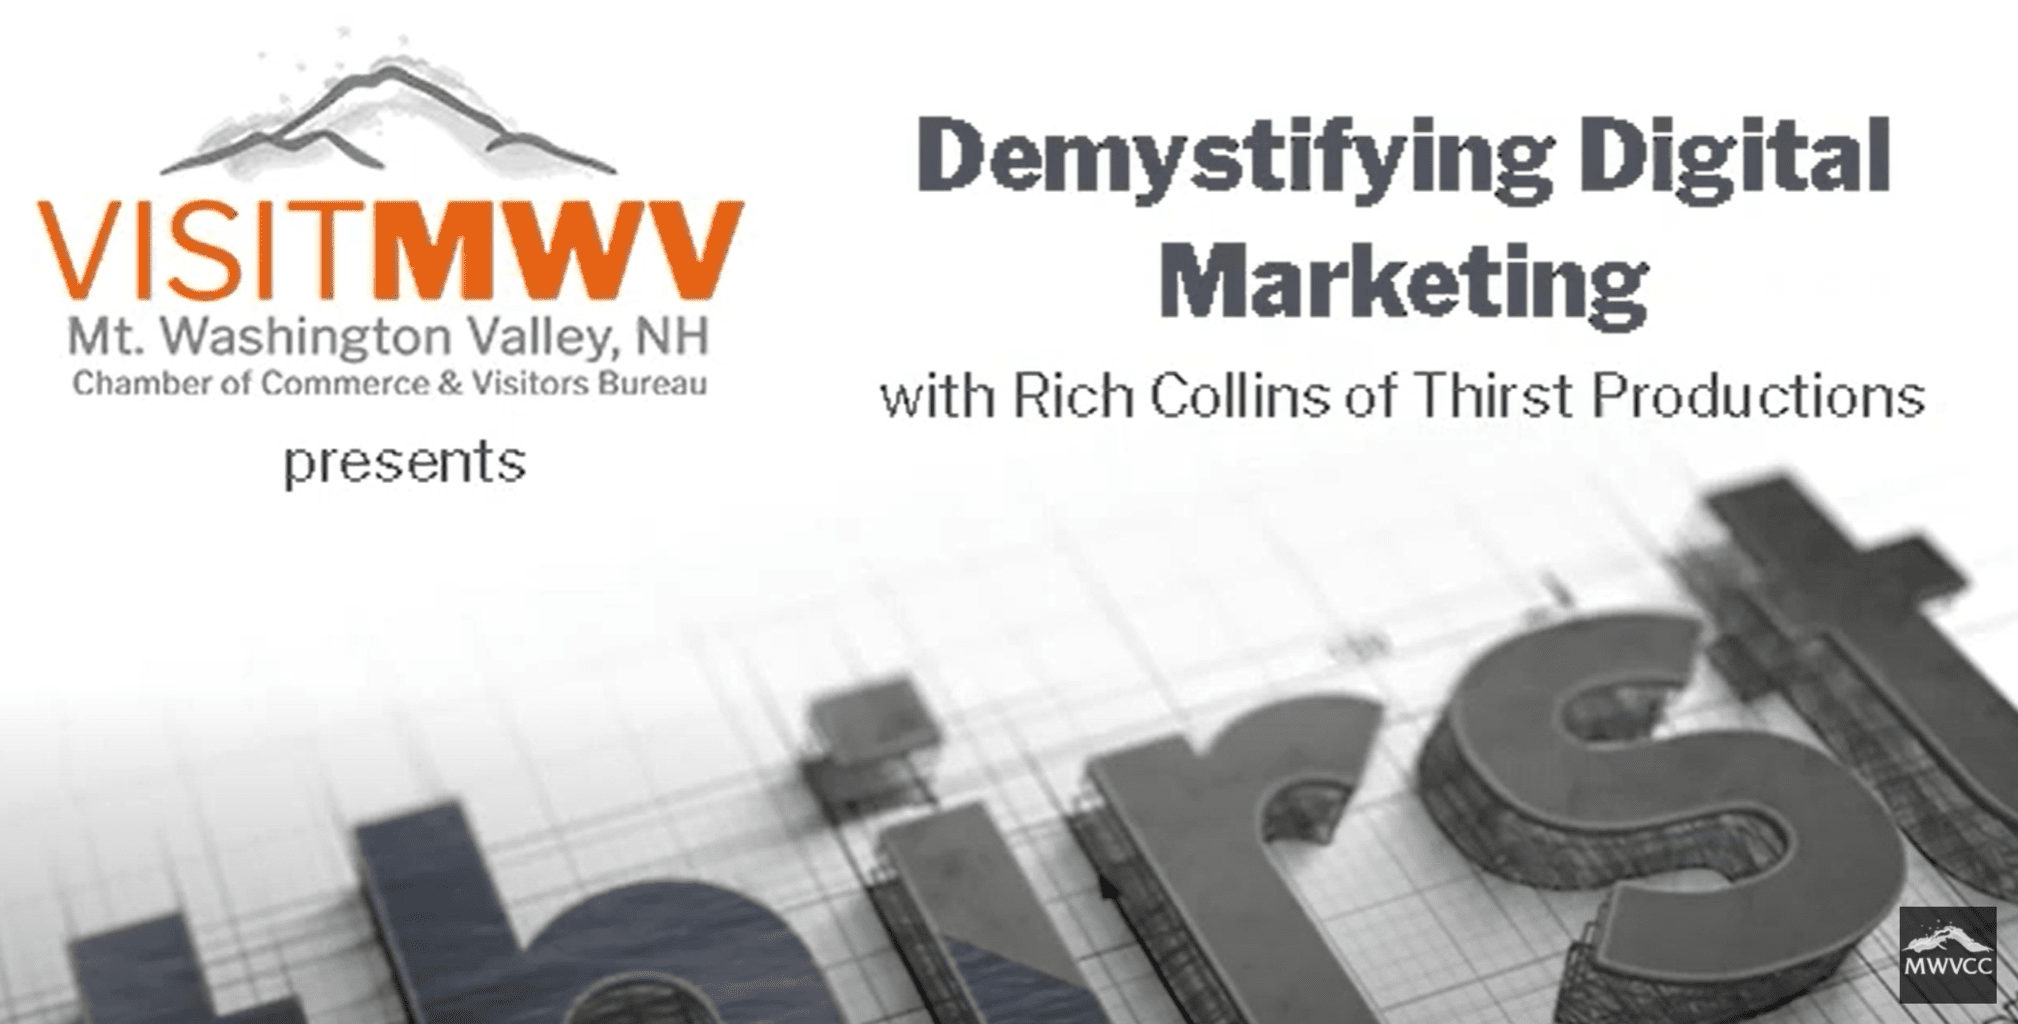 Demystifying Digital Marketing with Rich Collins, Thirst Productions